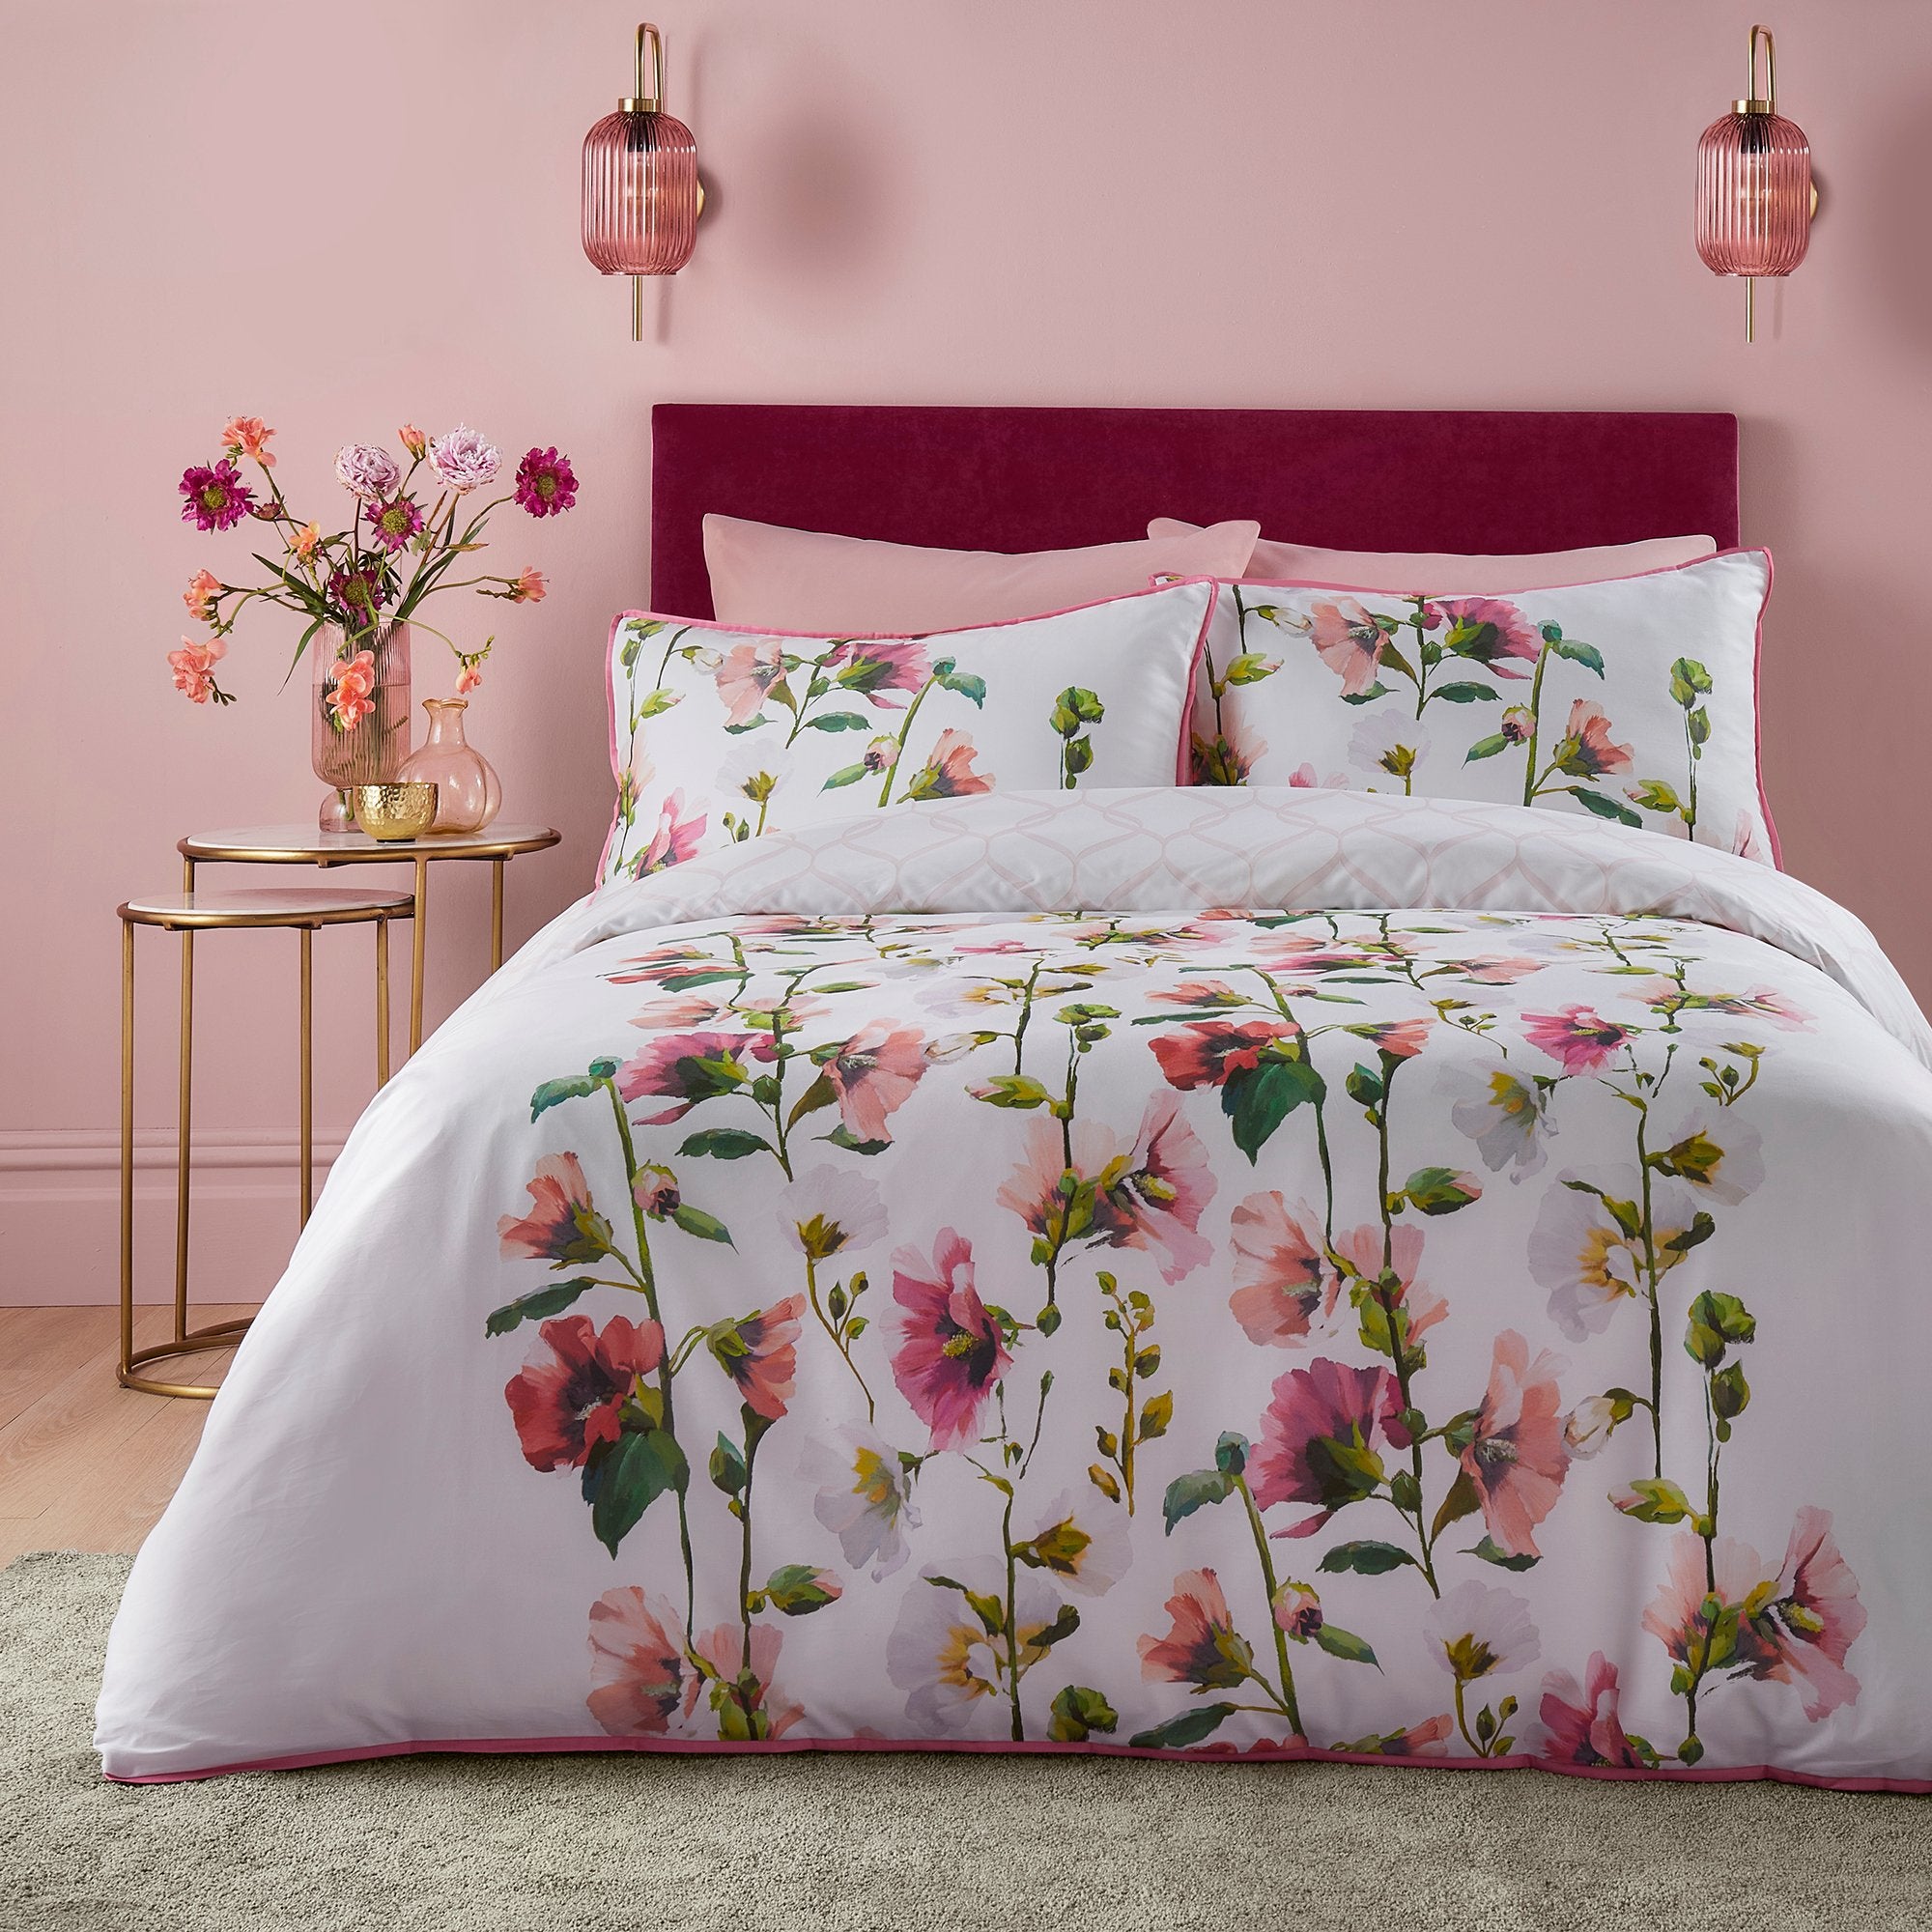 Duvet Cover Set Layla by Soiree in Pink